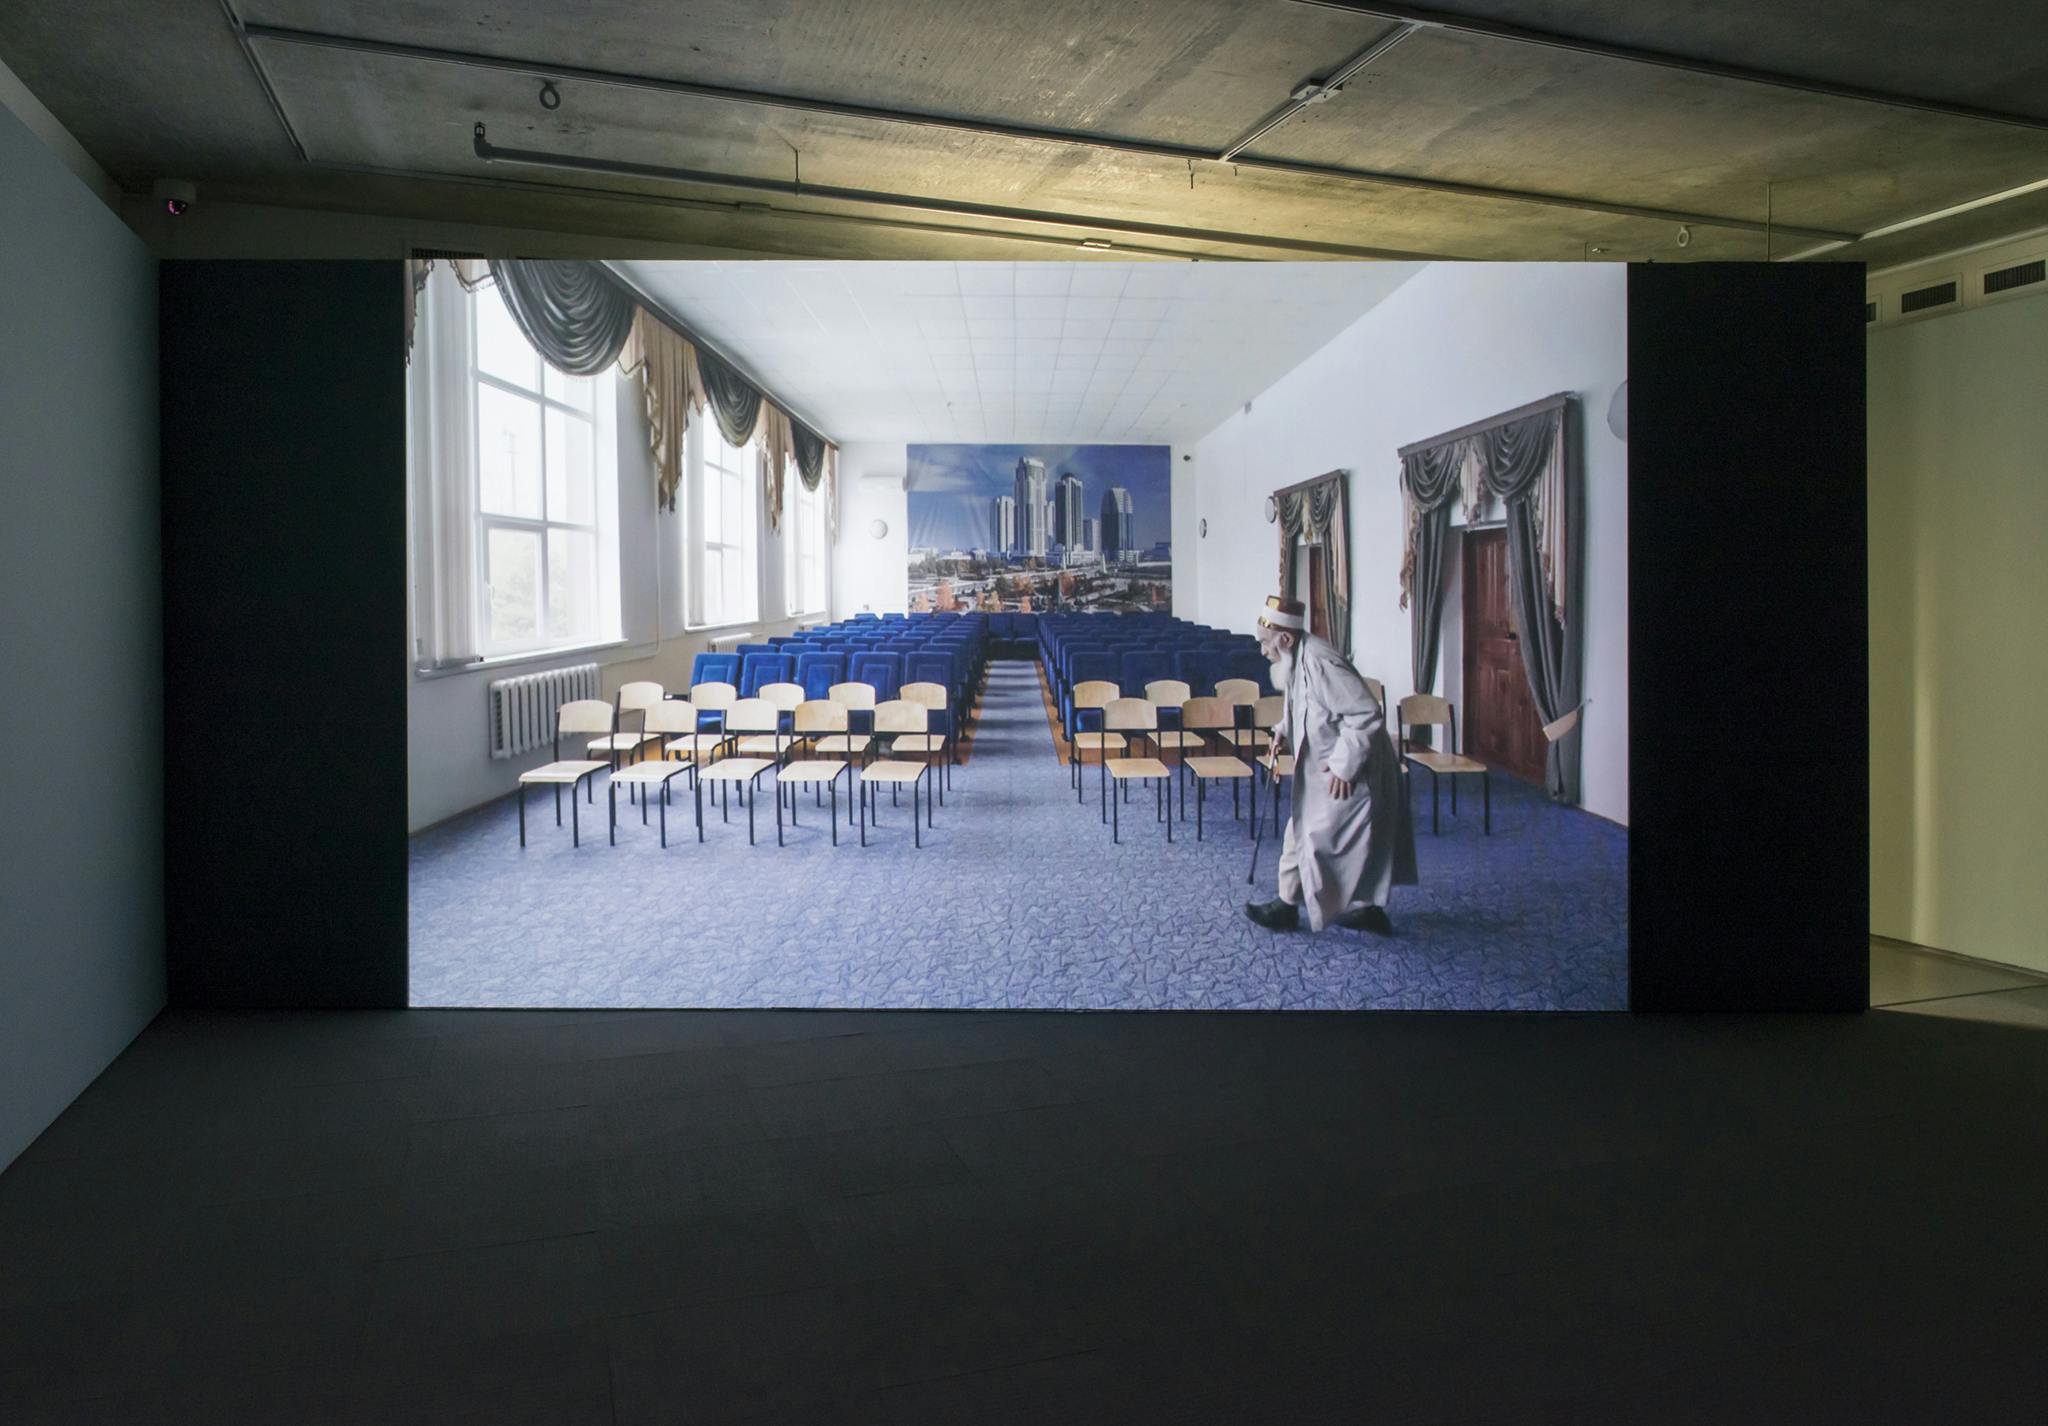 A large screen is installed in a darkened gallery displaying a projected single-channel video work. In the video, an older person with a white beard walks into a room filled with rows of chairs.